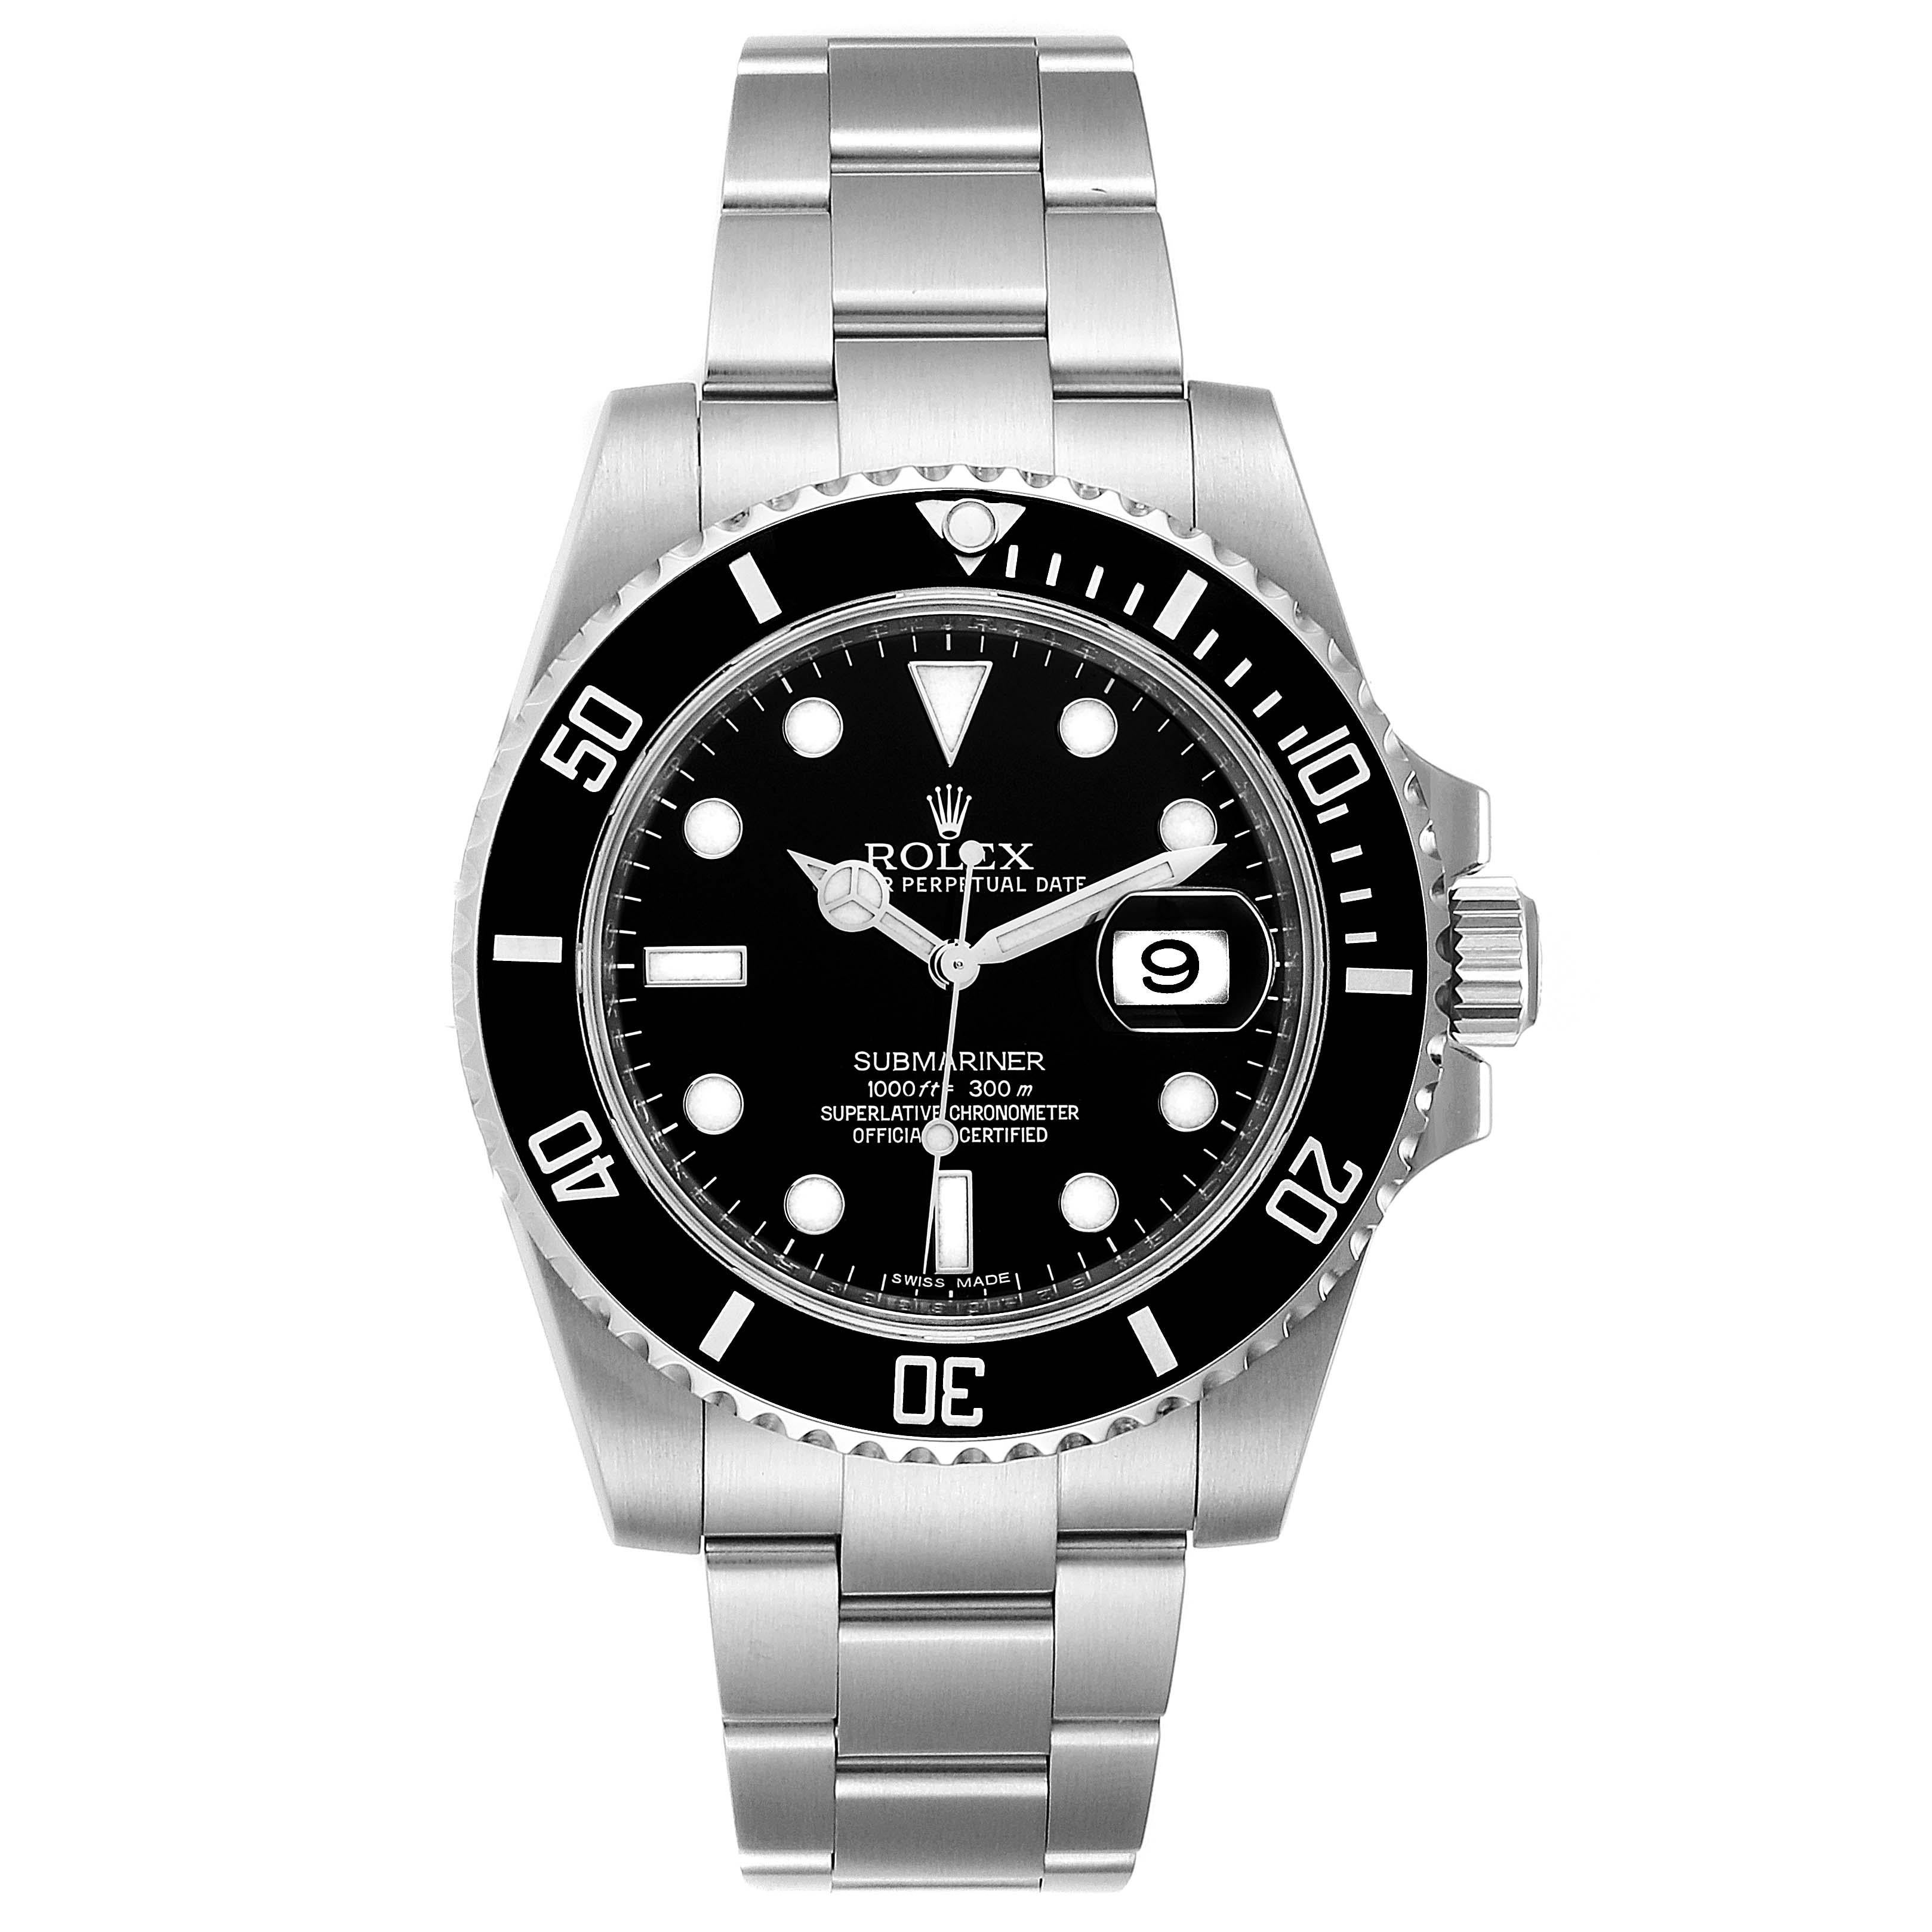 Rolex Submariner 40 Cerachrom Bezel Black Dial Watch 116610 Box Card. Officially certified chronometer self-winding movement. Stainless steel case 40 mm in diameter. Rolex logo on a crown. Unidirectional rotating black ceramic bezel with 60 minutes